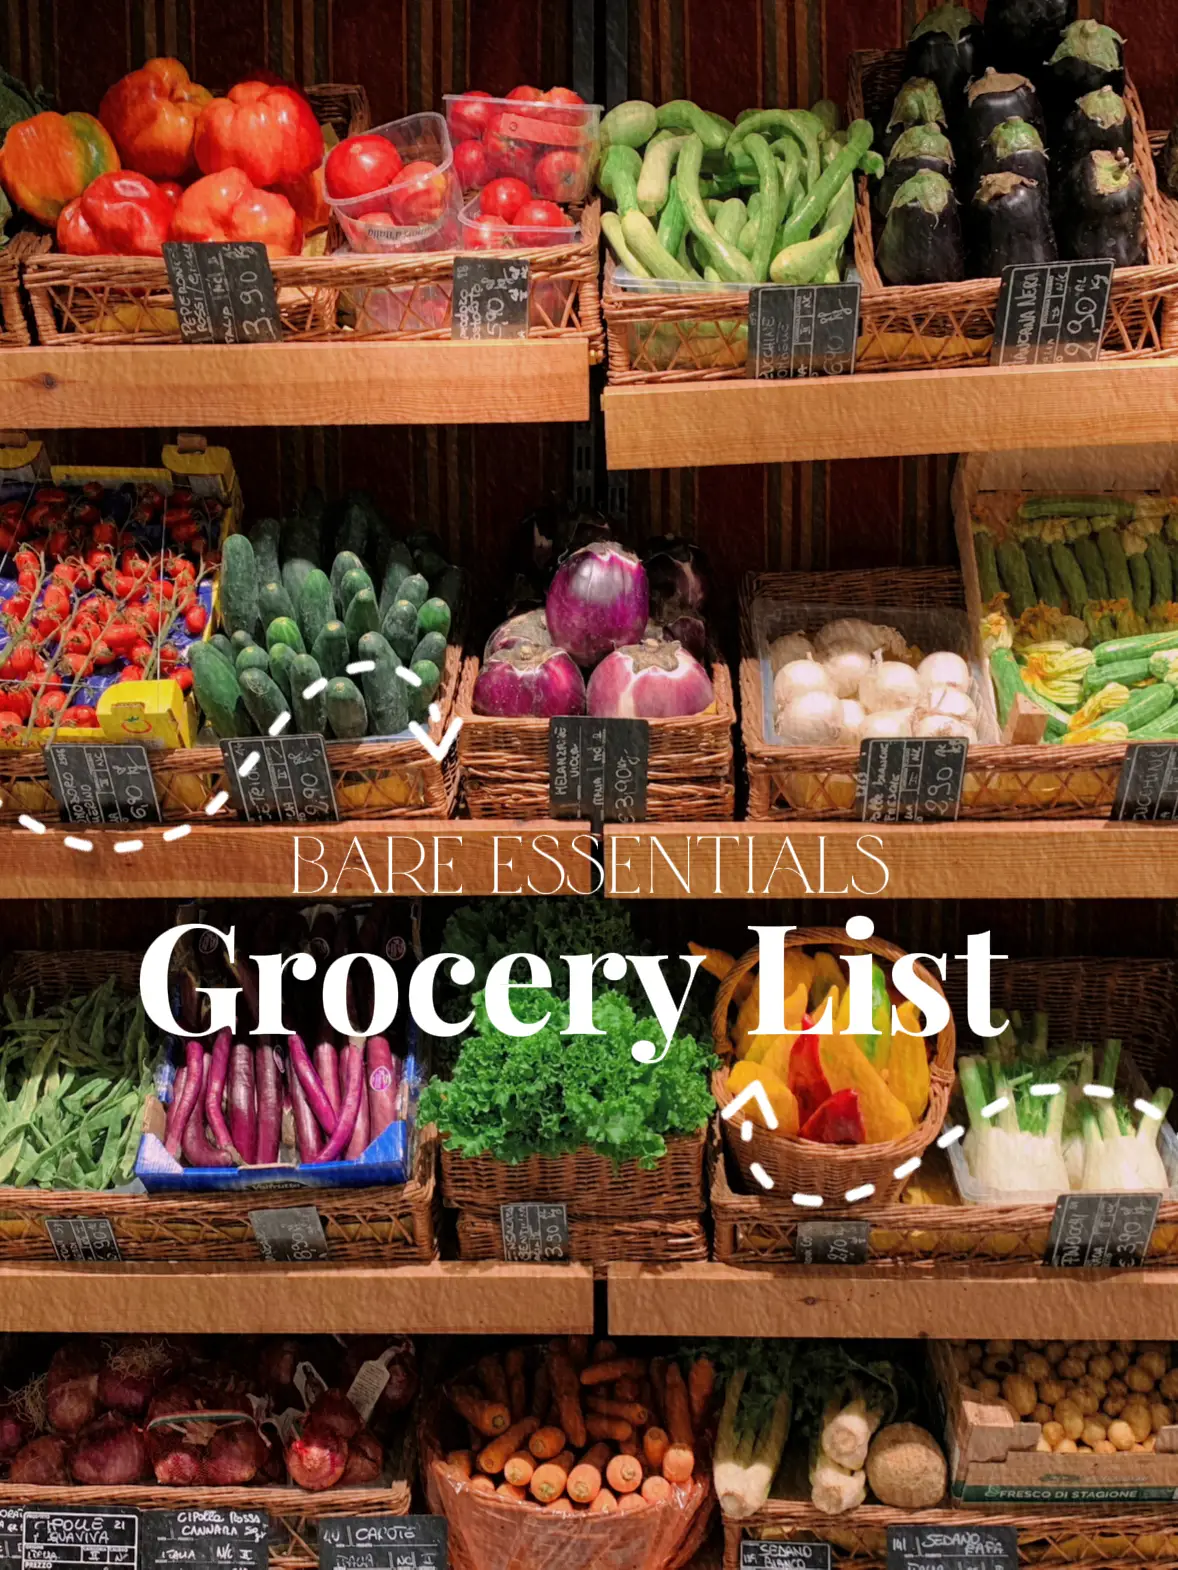 Must-Have Grocery Staples for Weight Loss 🥑🍳, Gallery posted by Dr.  Rachel Paul